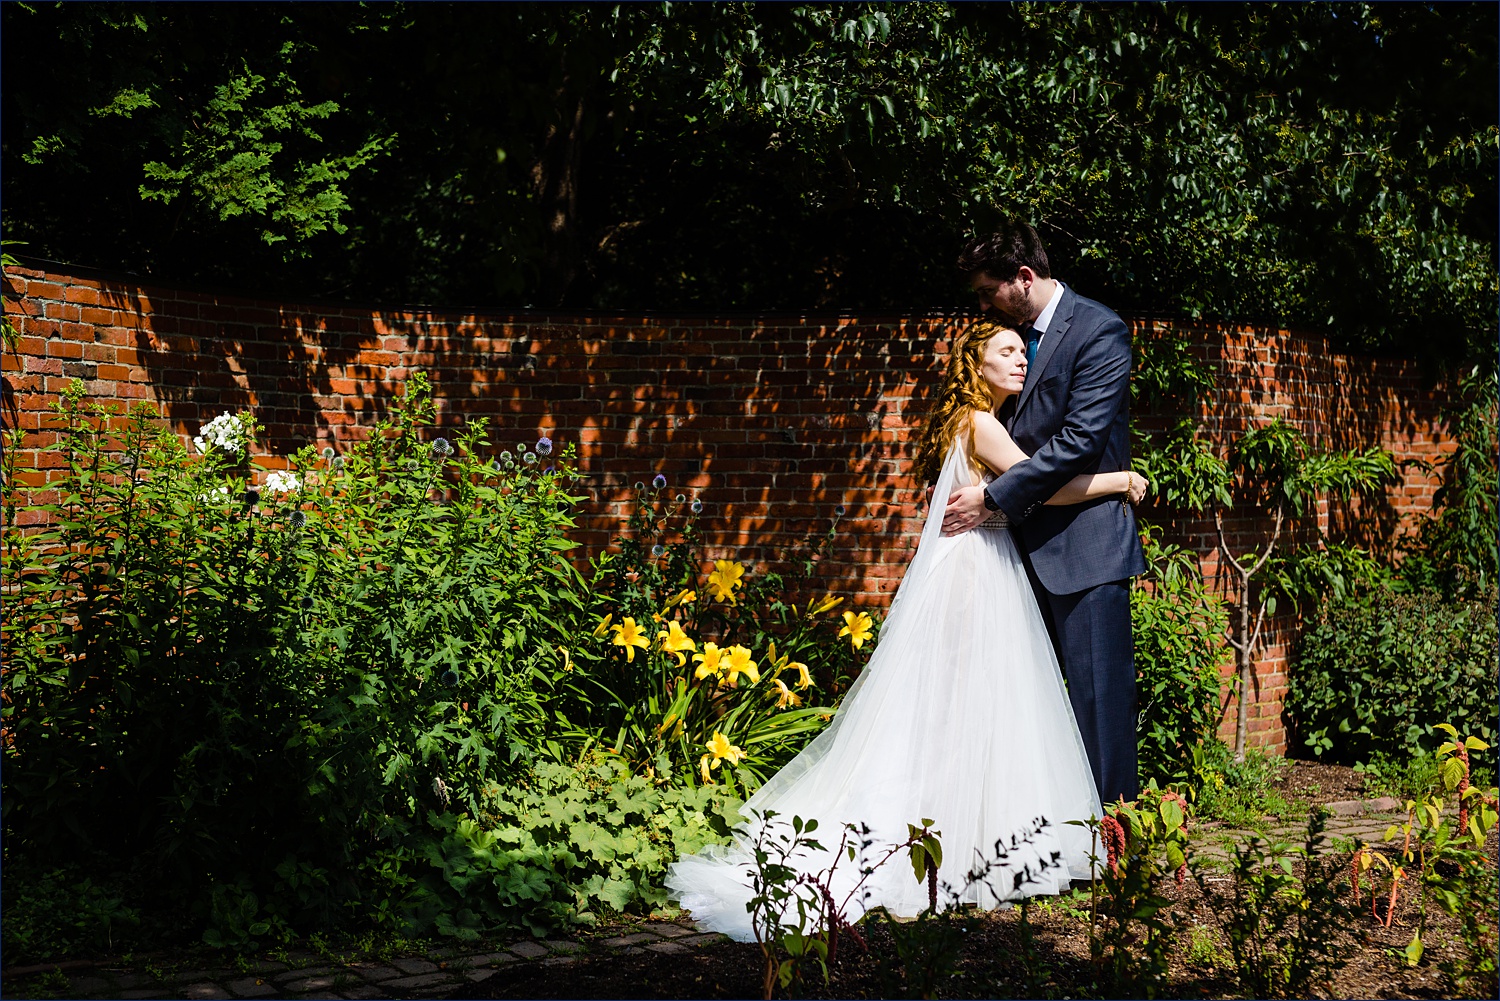 A hug in the gardens of the Stevens-Coolidge Place gardens in Andover, MA for a backyard wedding